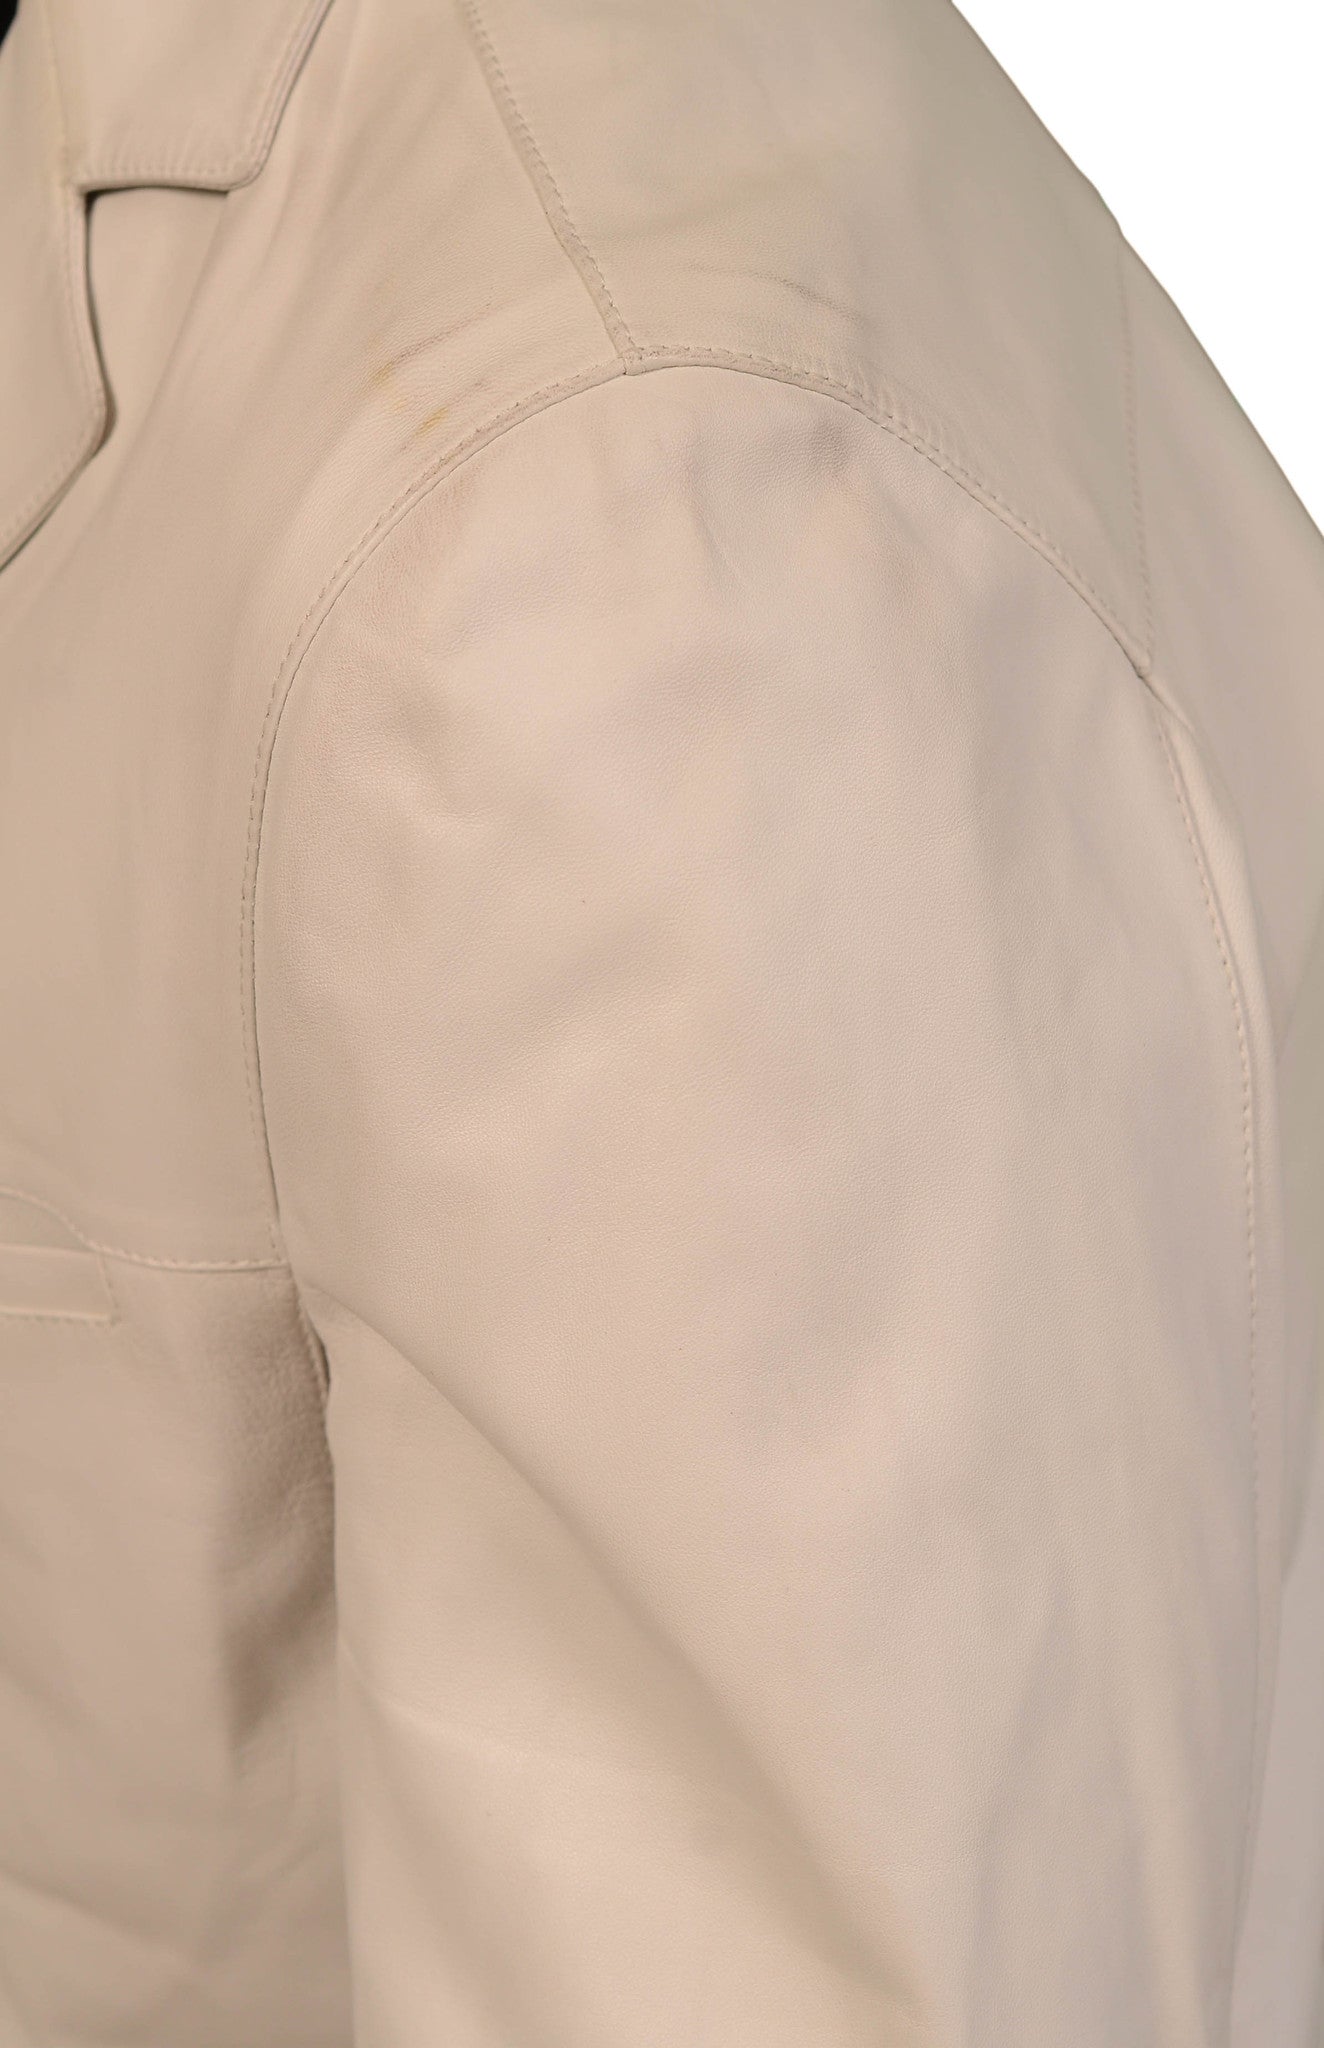 KITON Napoli Solid Off-White Leather Jacket Coat with Perforated Details EU 50/ US 40 - SARTORIALE - 9